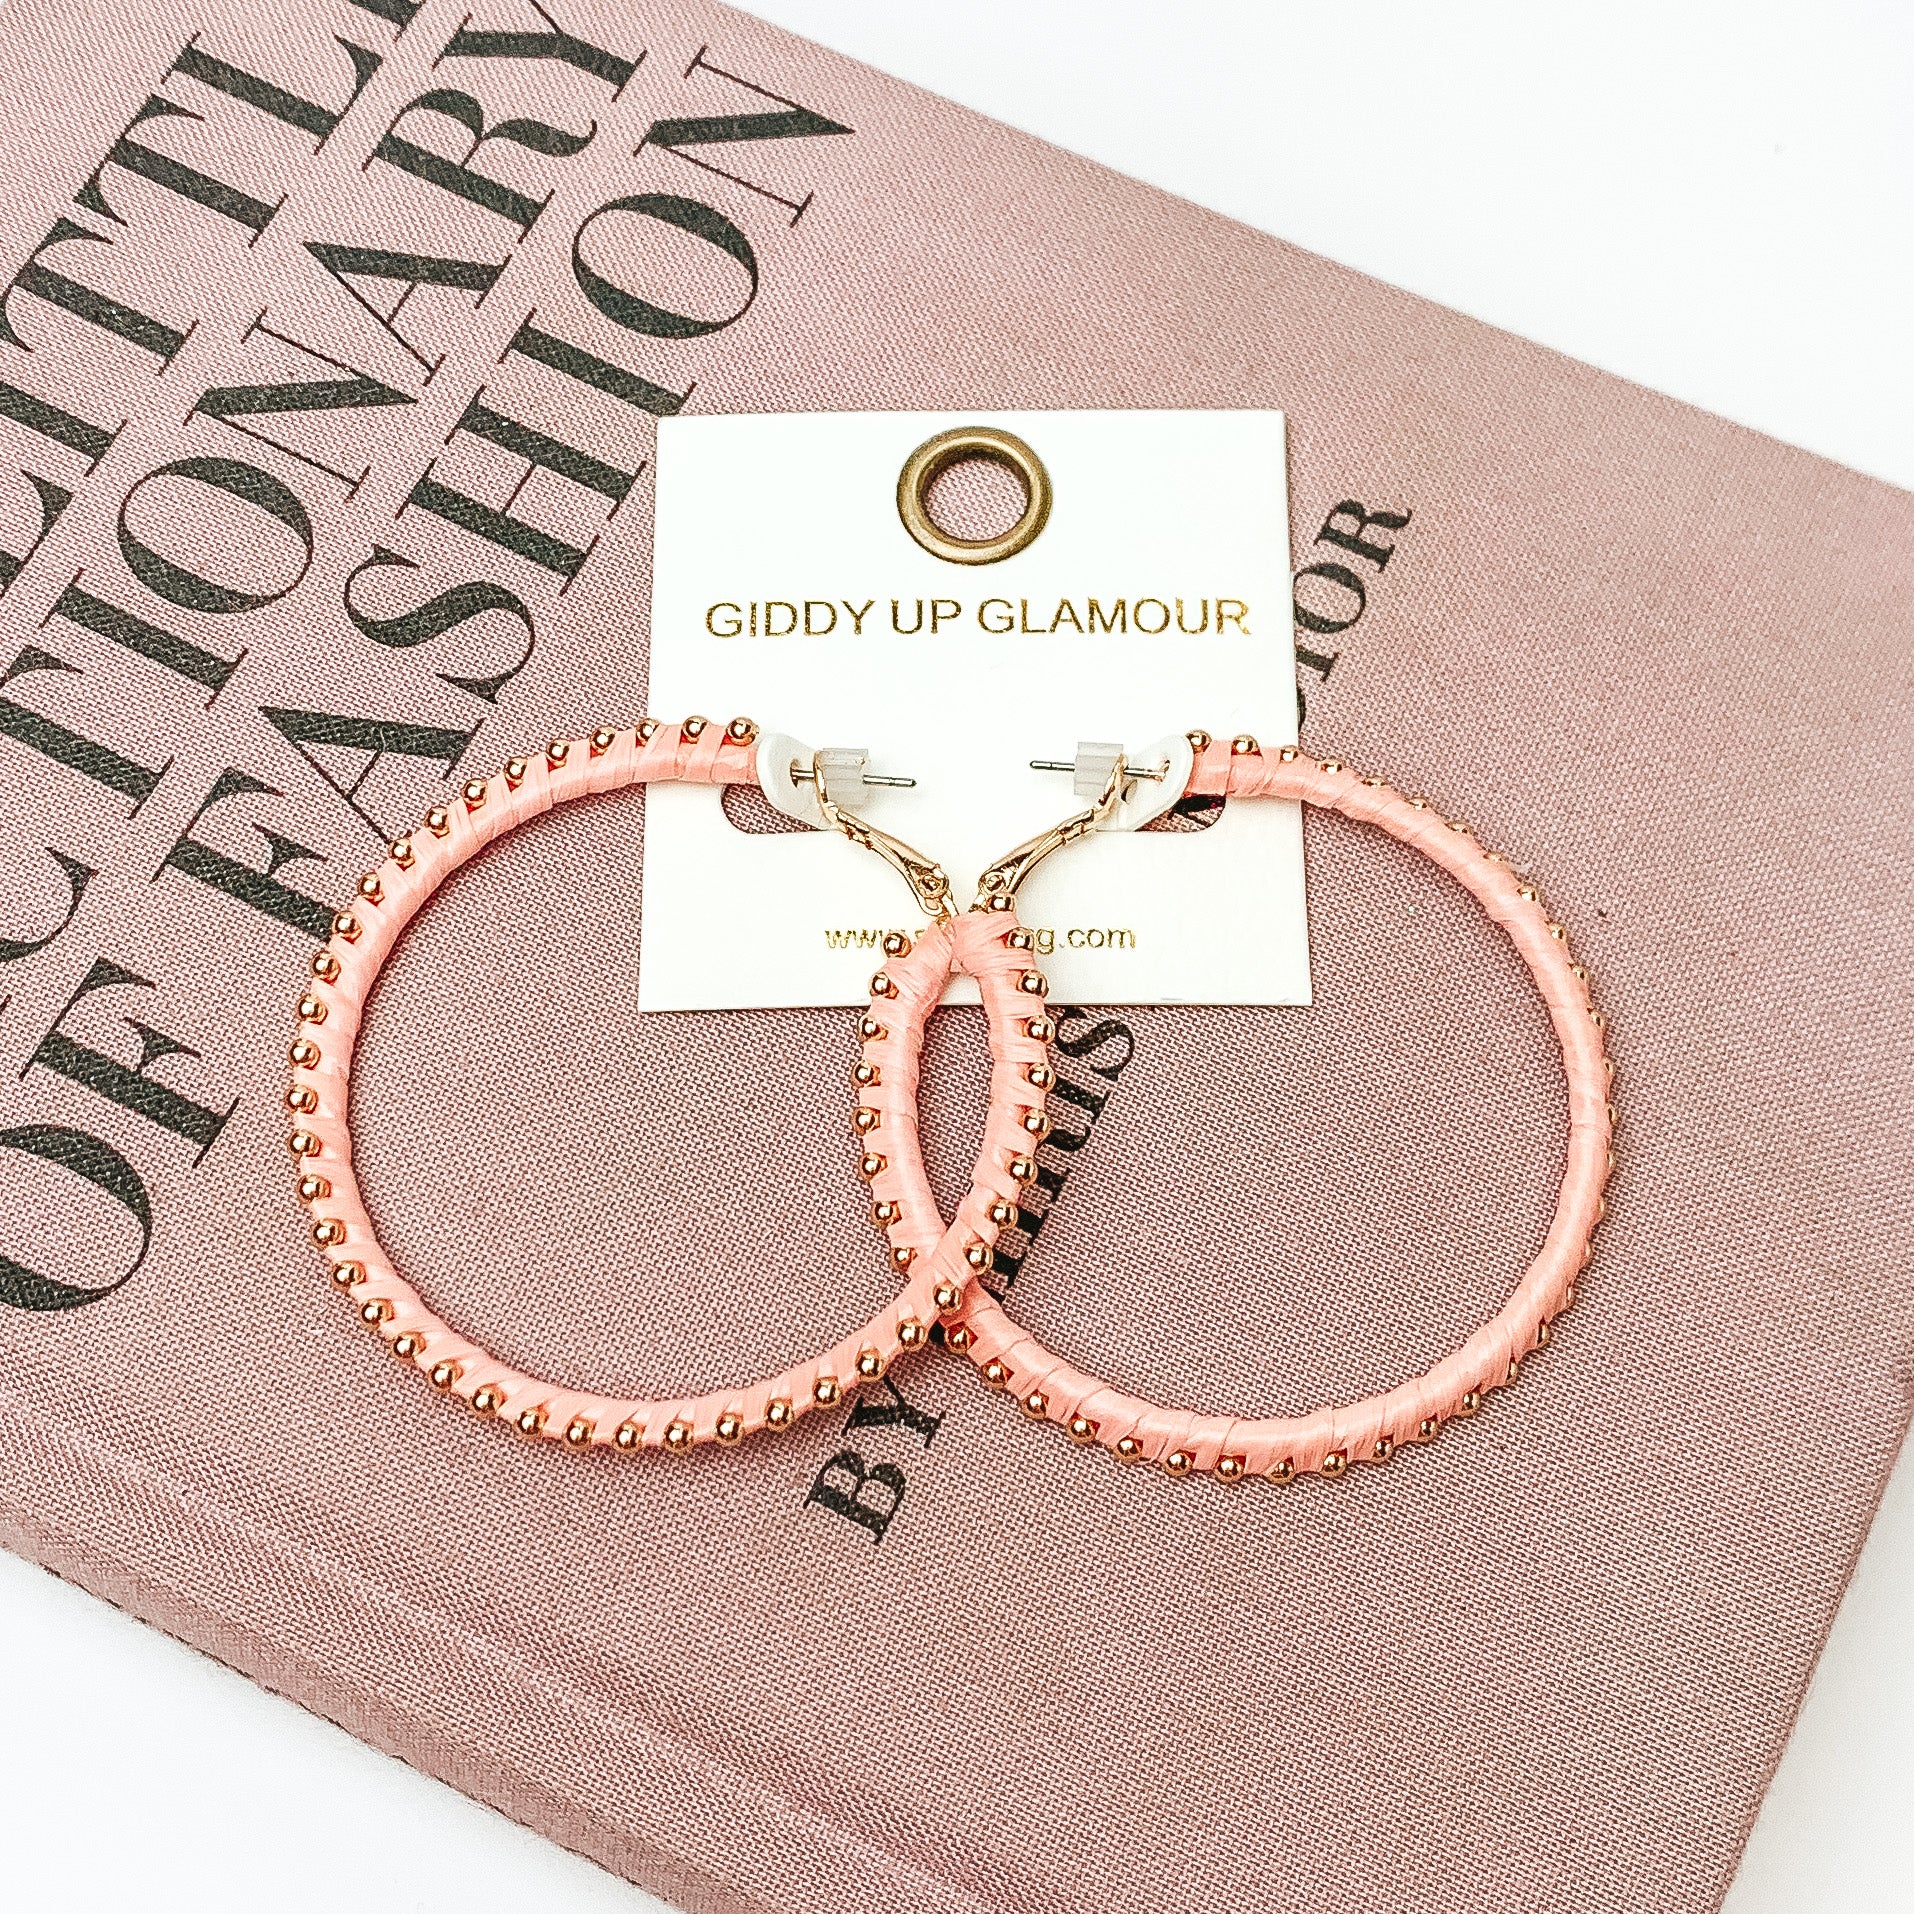  Pictured are circle light pink hoop earrings with gold beads around it. They are pictured with a pink fashion journal on a white background.